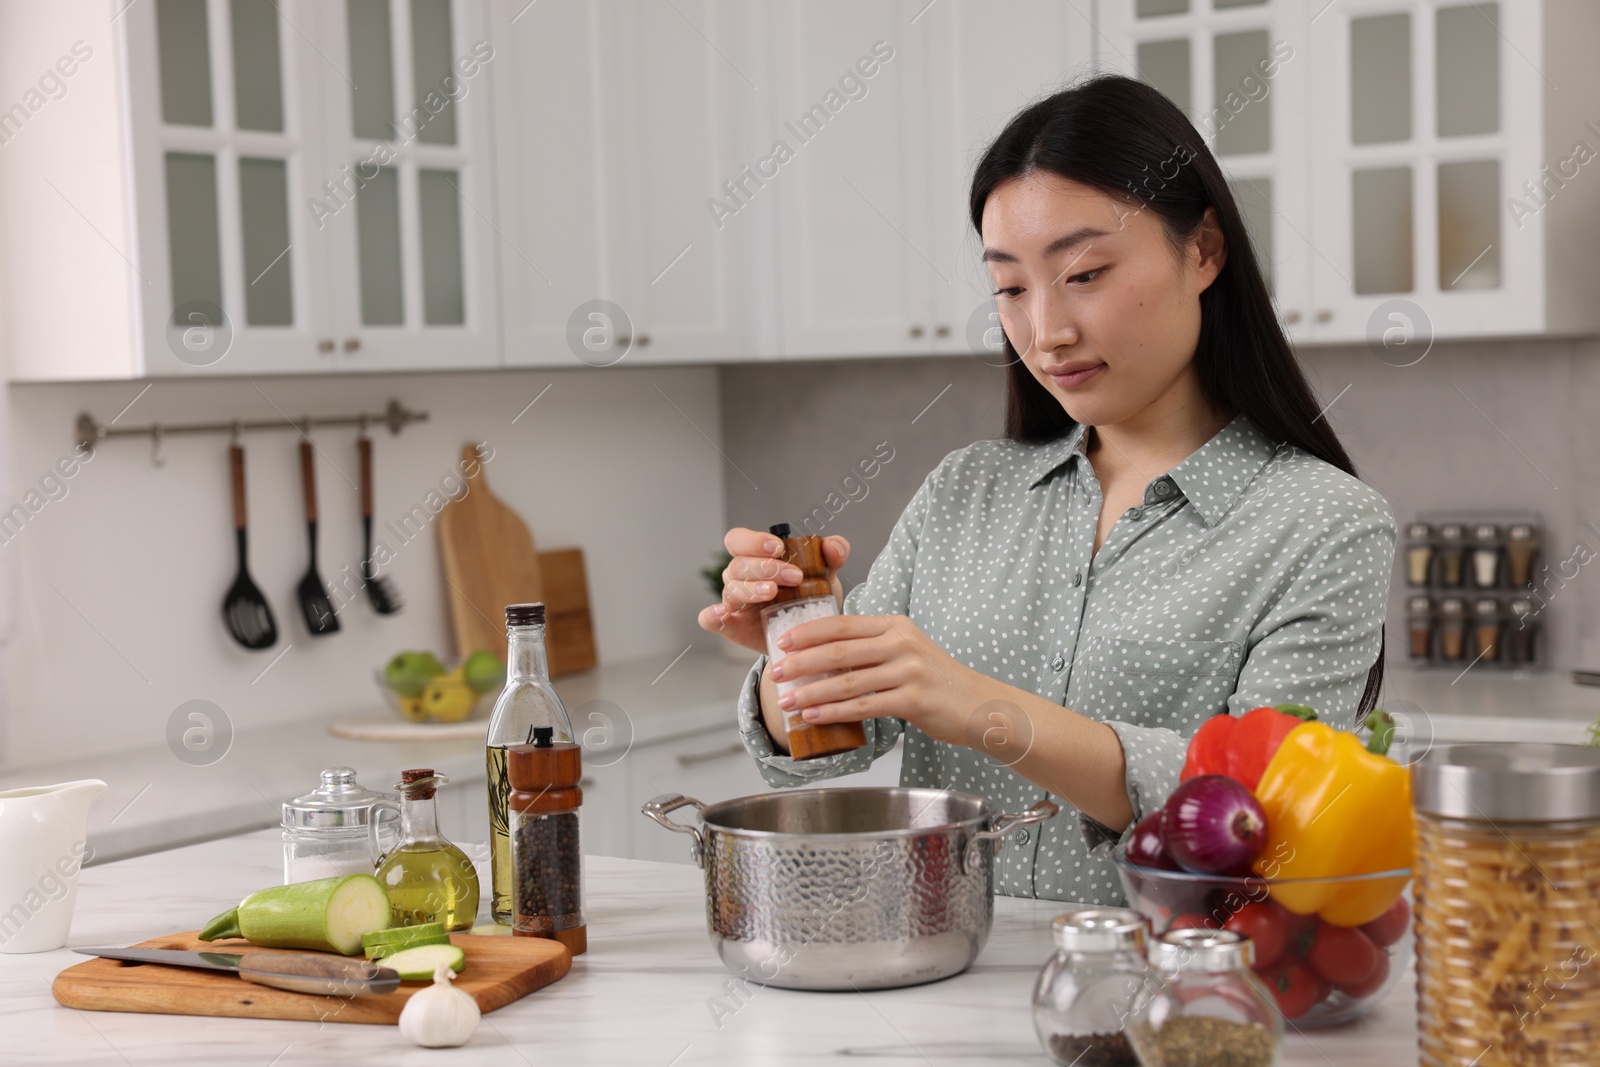 Photo of Beautiful woman cooking at countertop in kitchen